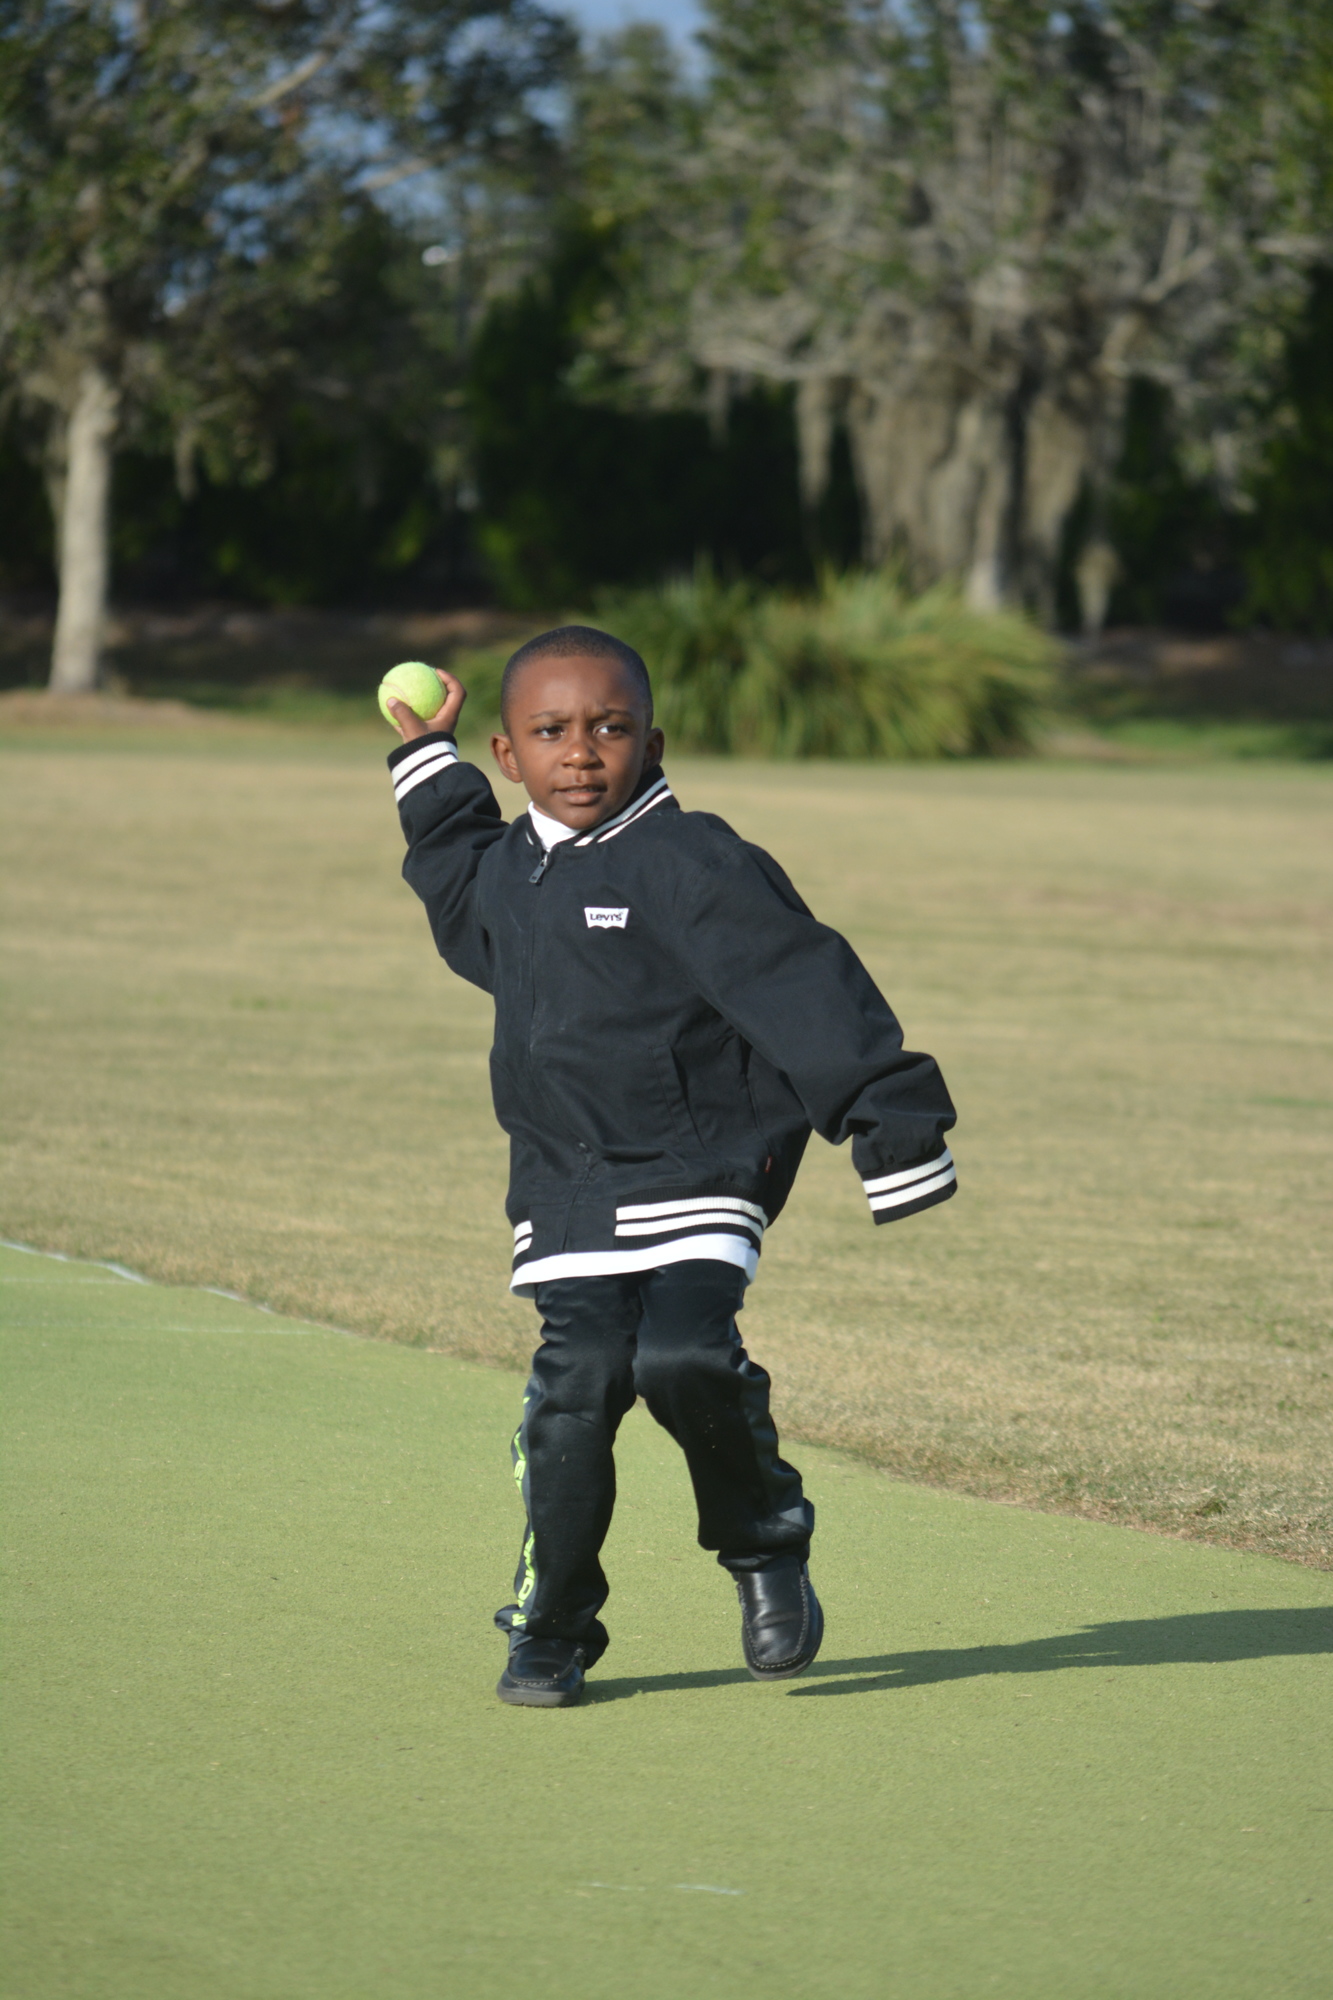 Michael Miles Anderson, 5, bowls a ball.